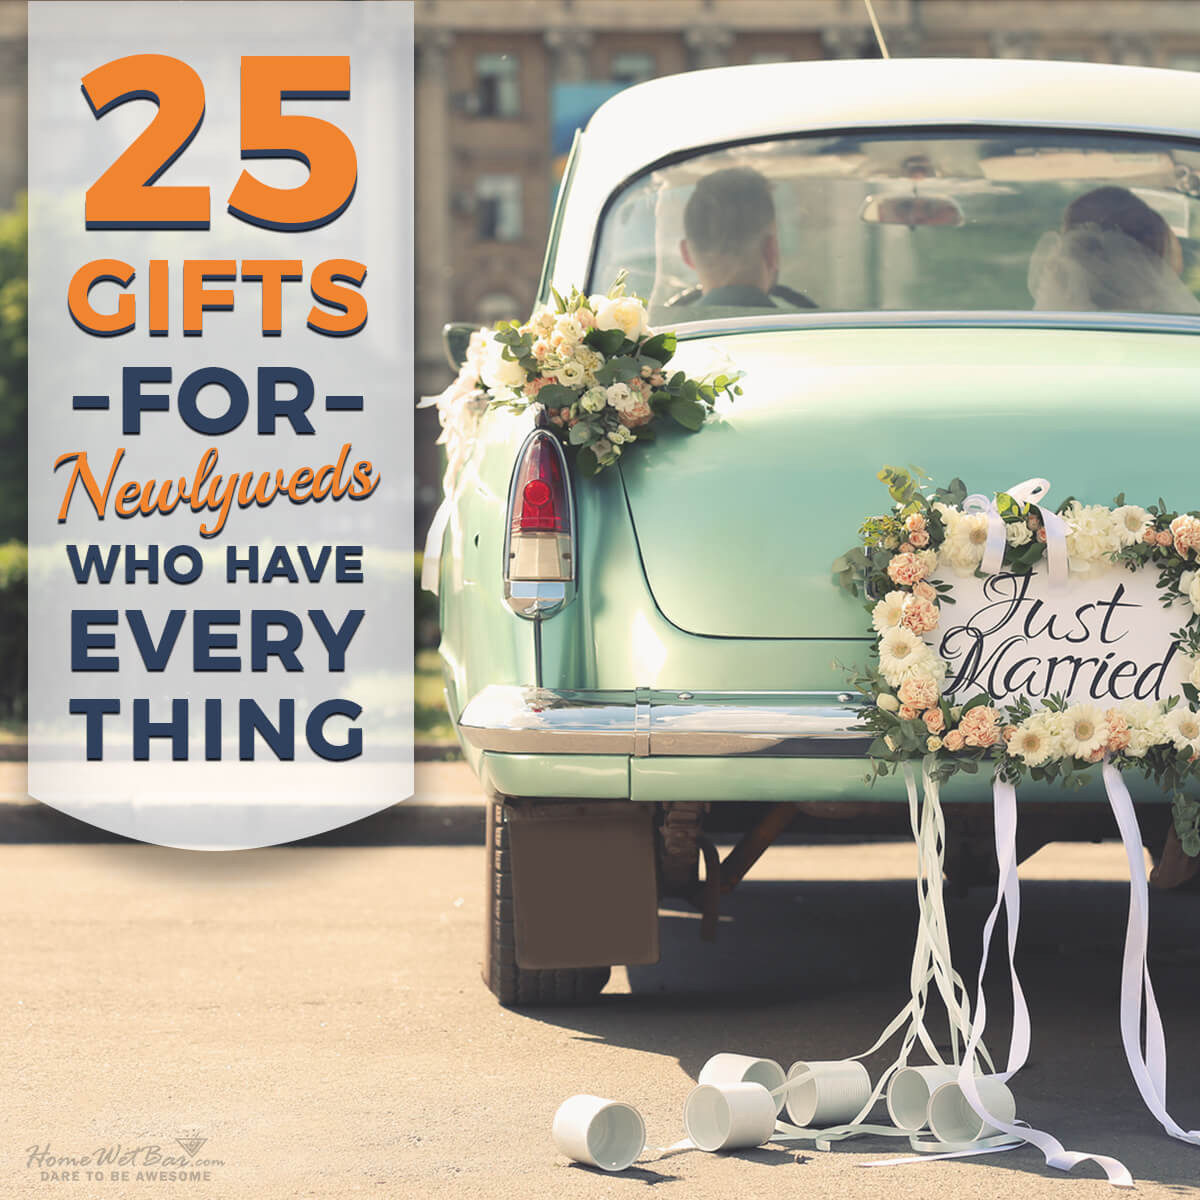 Housewarming Gift Ideas For Couples Who Have Everything
 25 Gifts for Newlyweds Who Have Everything